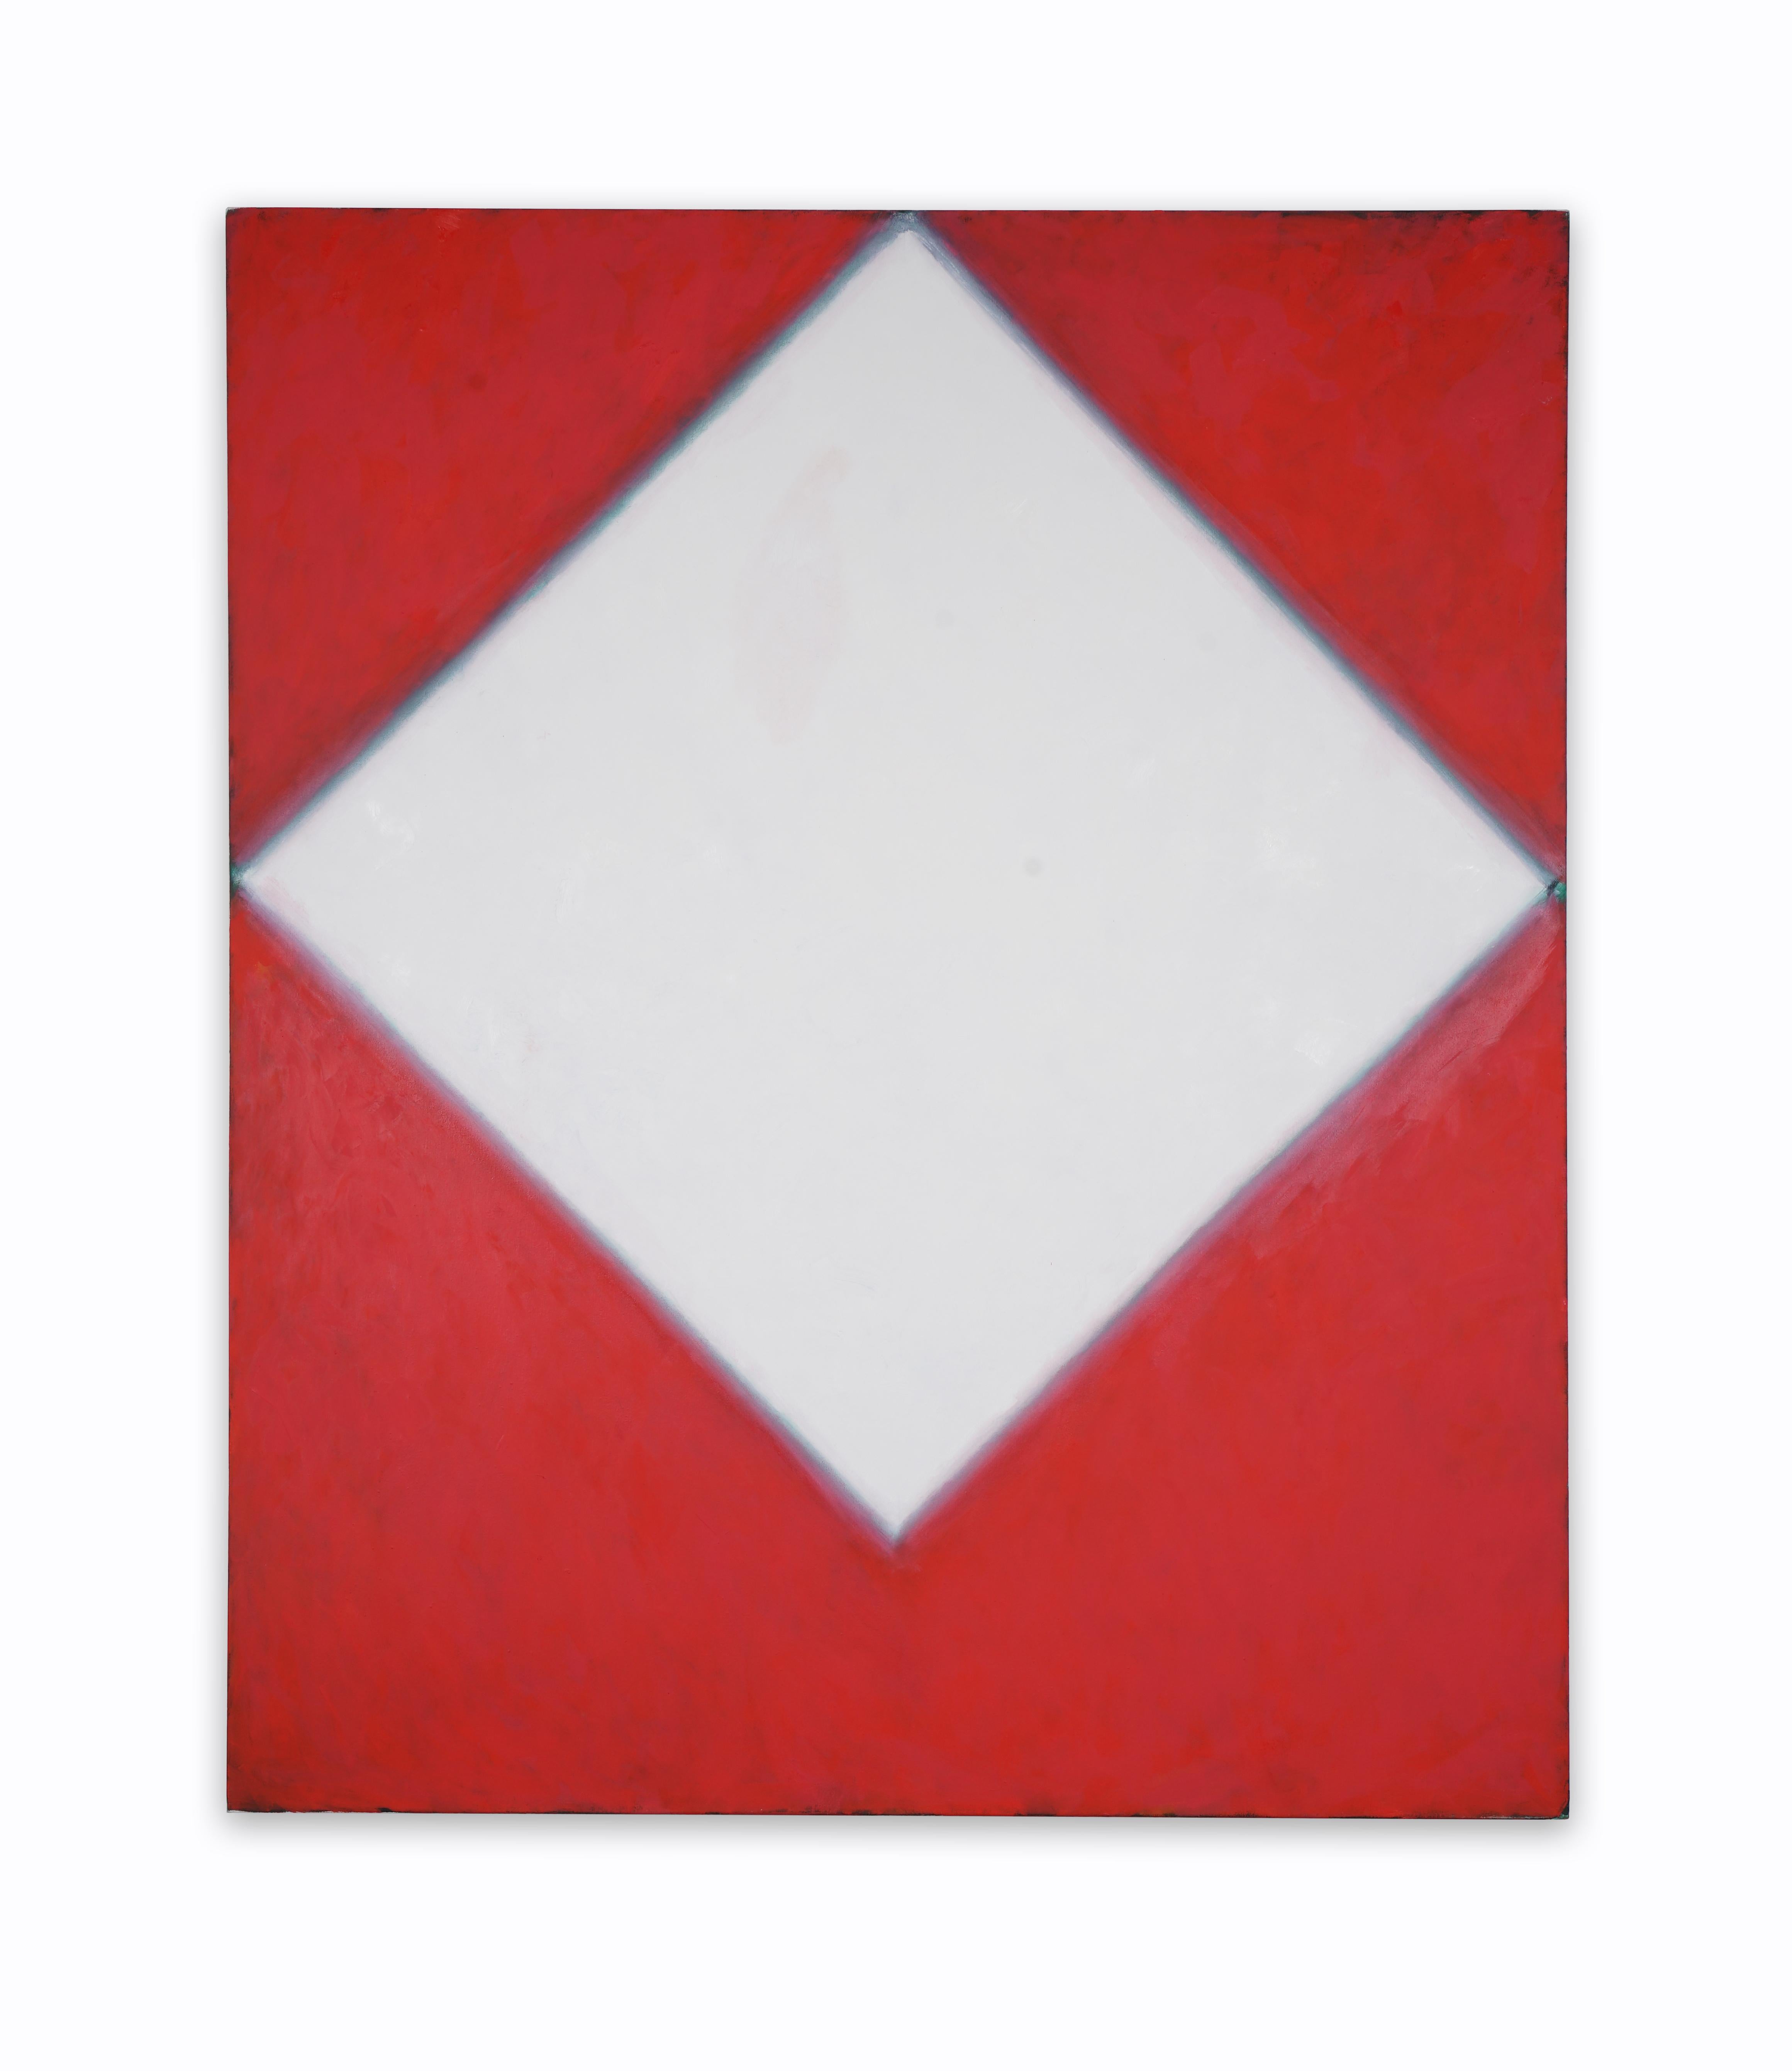 Peter Lodato Abstract Painting - Vermillion with White Diamond